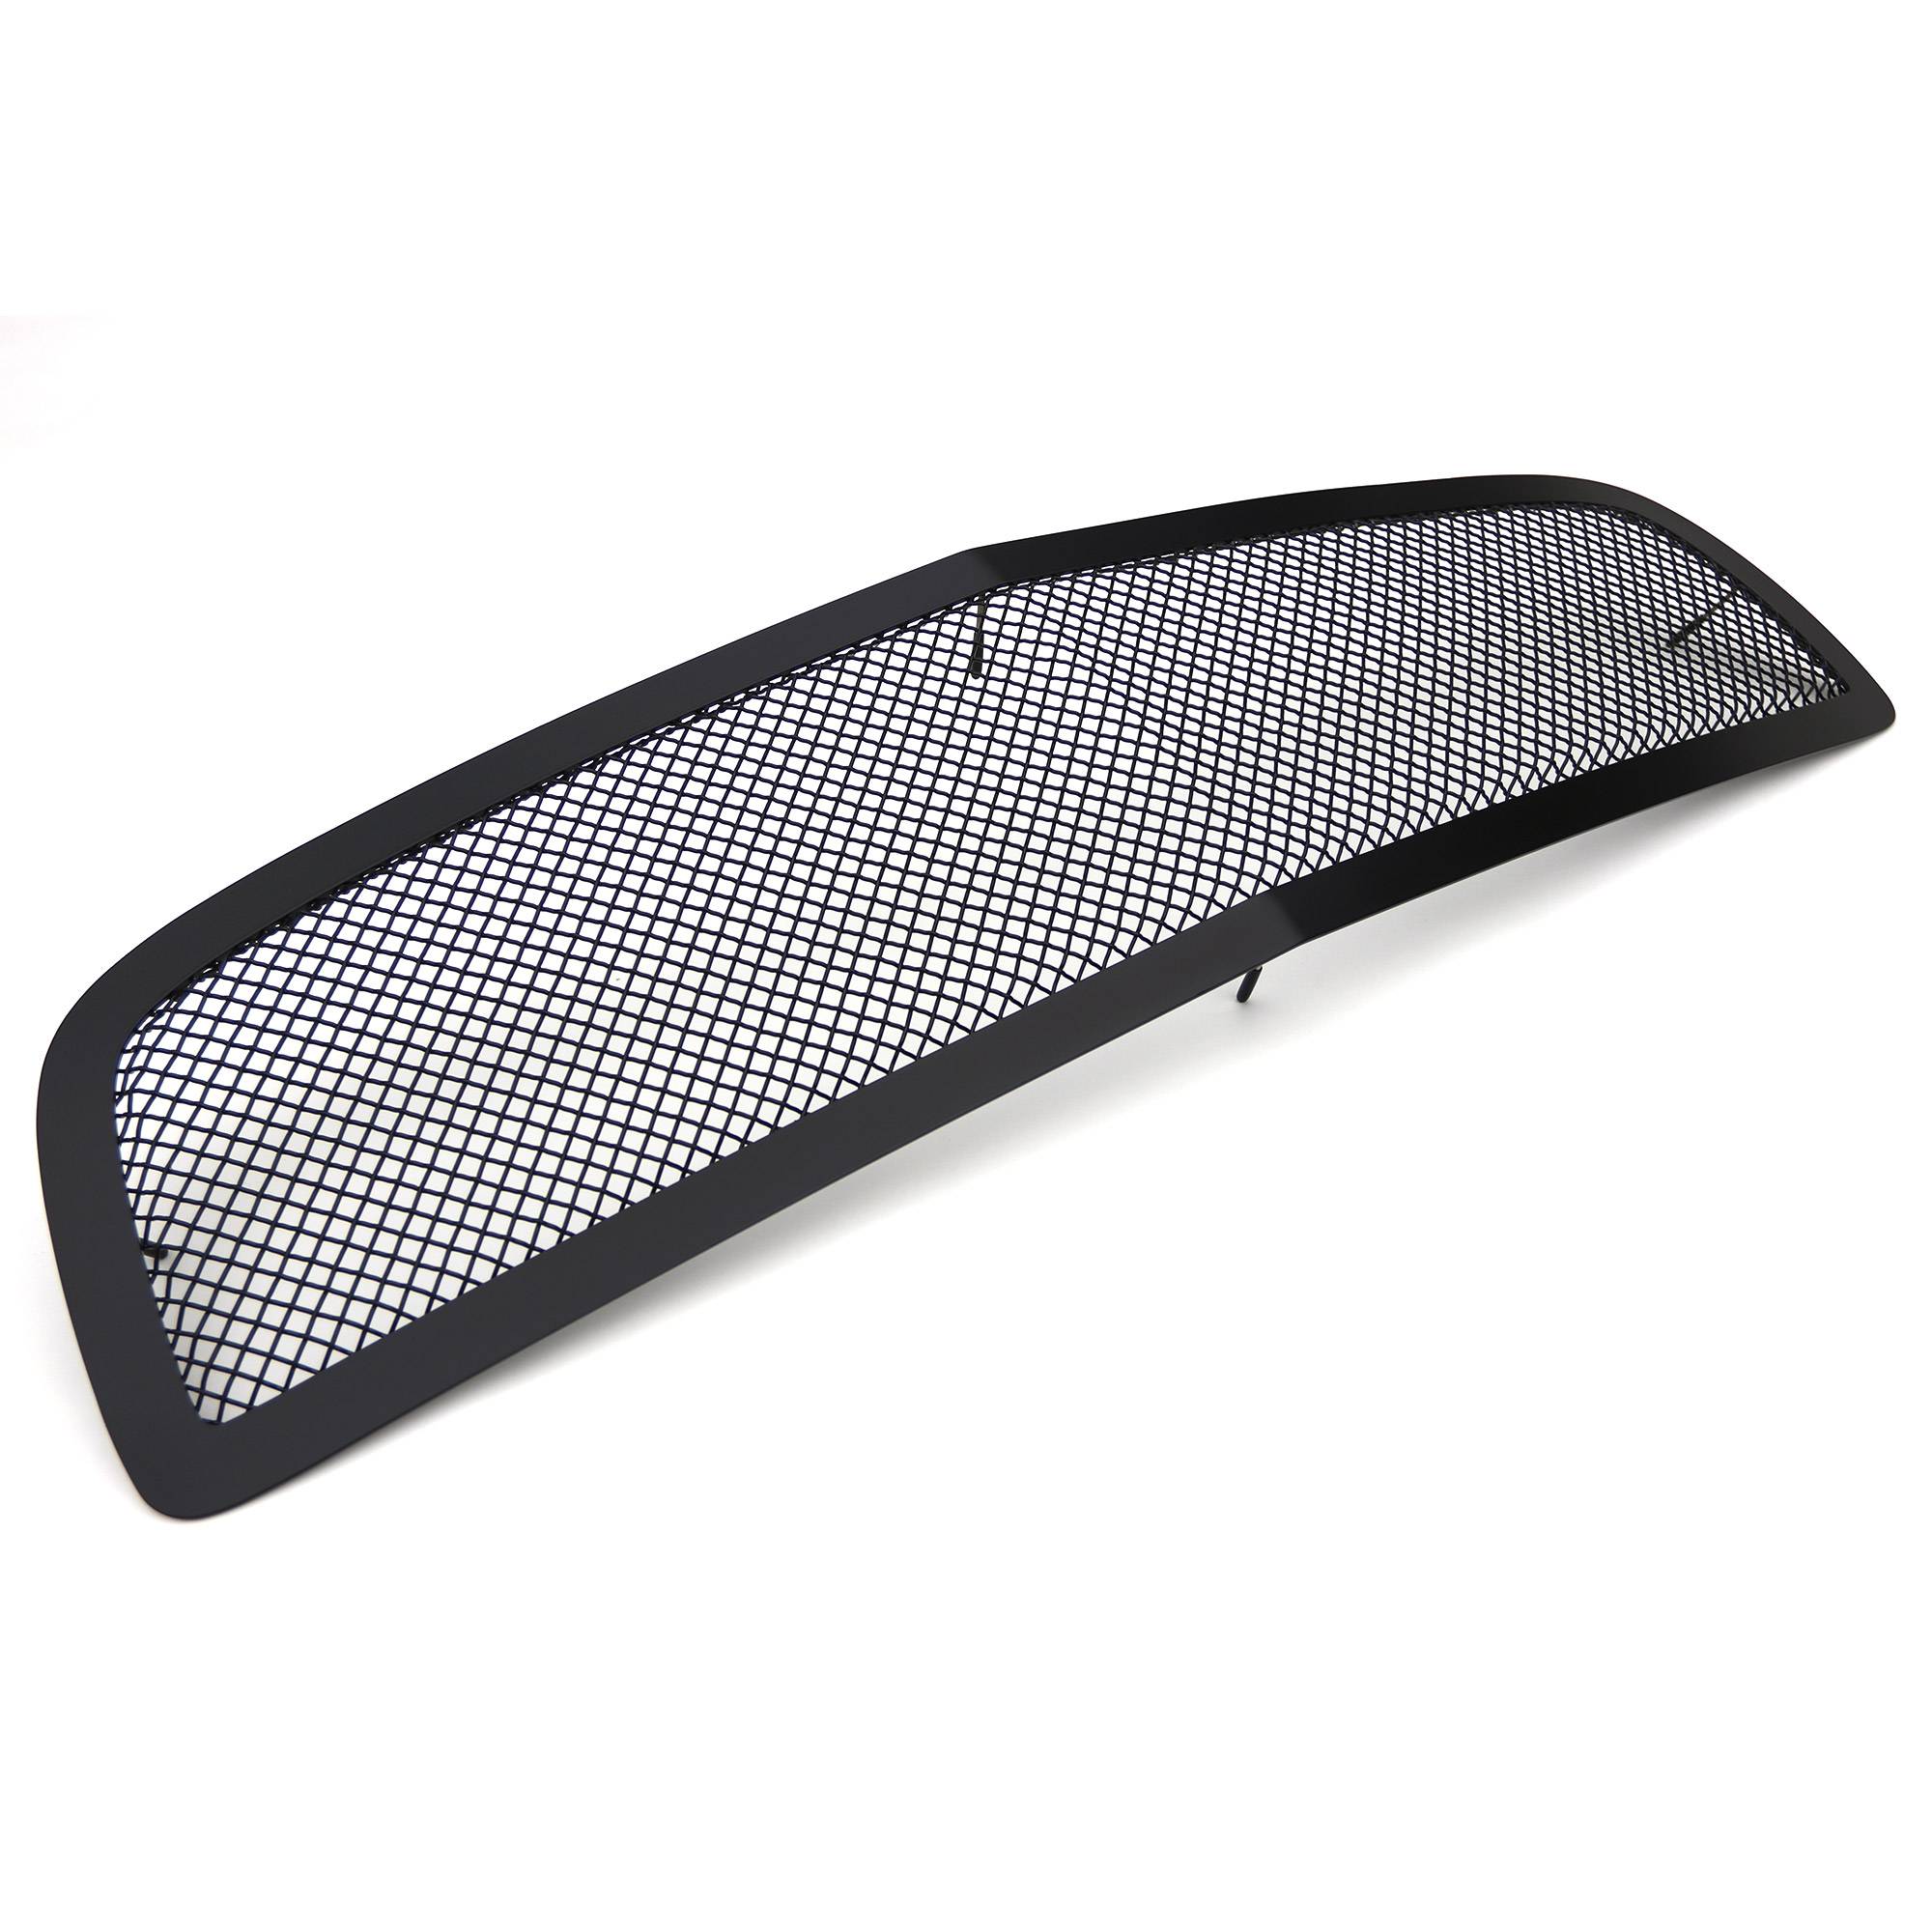 2006-2010 Charger Upper Class Series Mesh Grille, Black, 1 Pc, Replacement  - Part # 51474